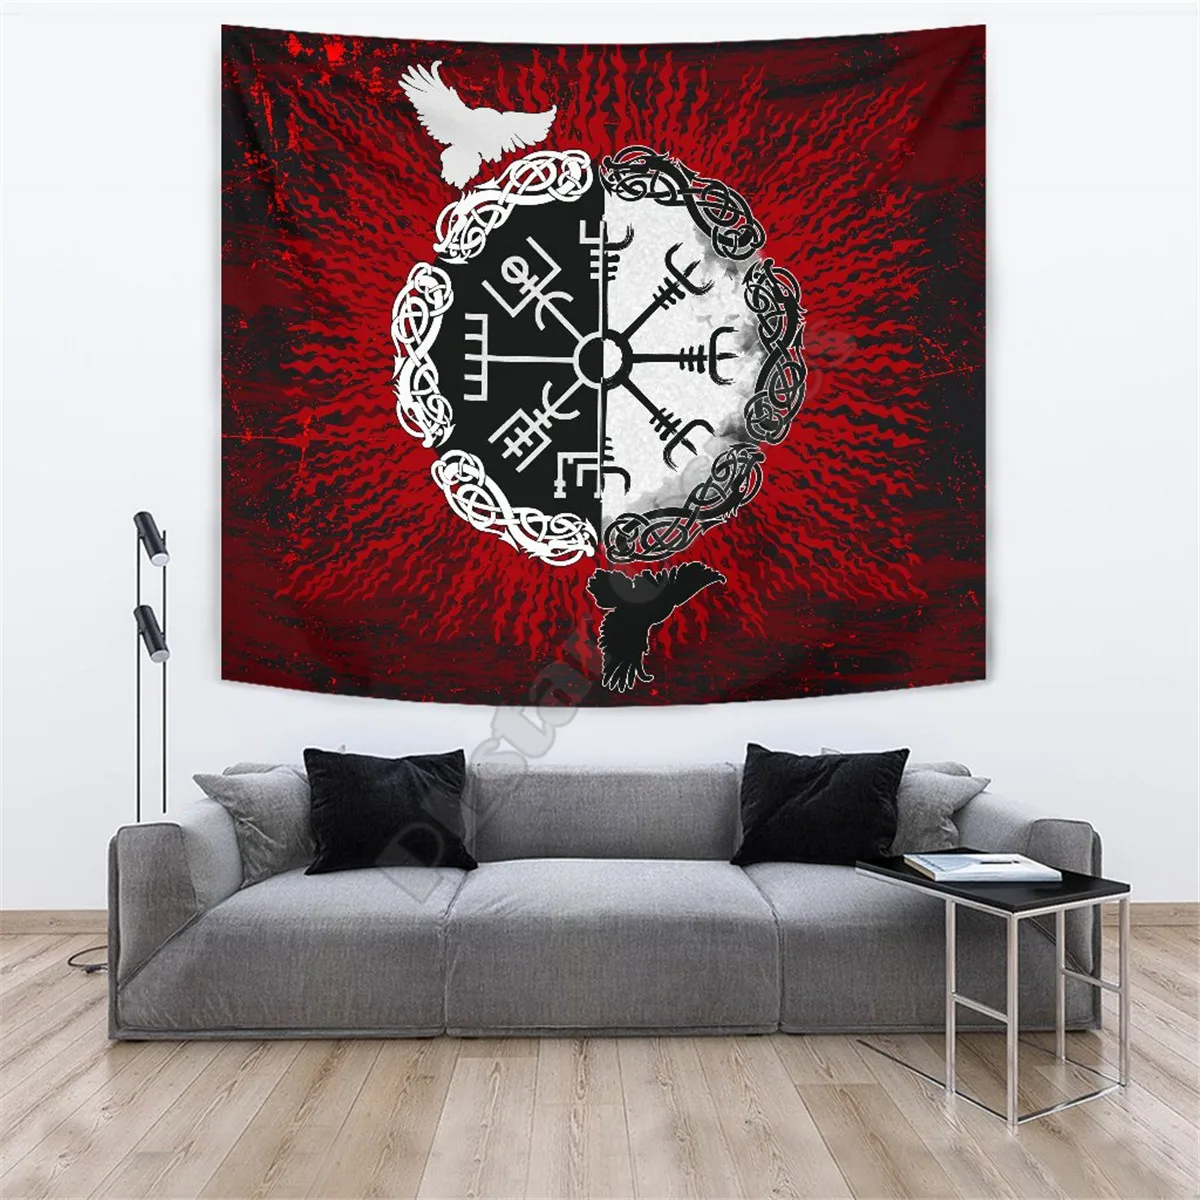 

Viking Tapestry Raven of Odin Symbol Viking on Blood 3D Print Wall Tapestry Rectangular Home Decor Wall Hanging Home Decoration